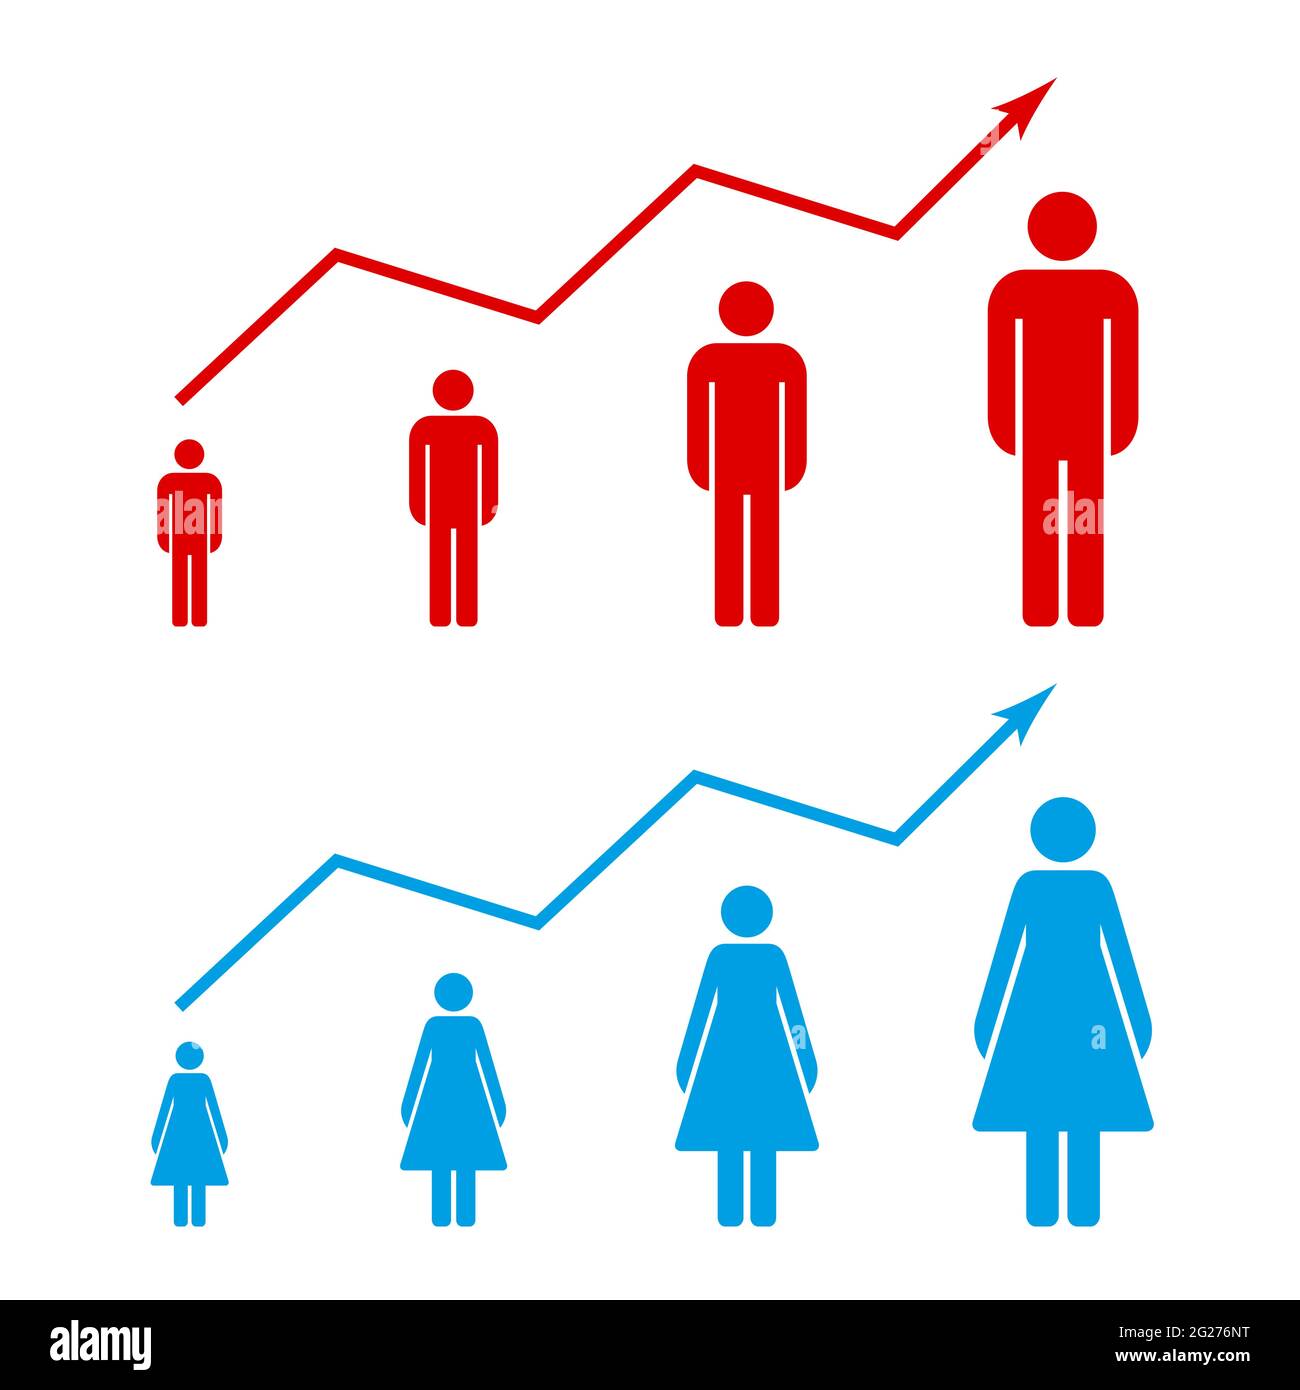 Population growth chart graph. Population density growing graph. Men and women statistics. Stick figure simple icons. Vector illustration. Stock Vector